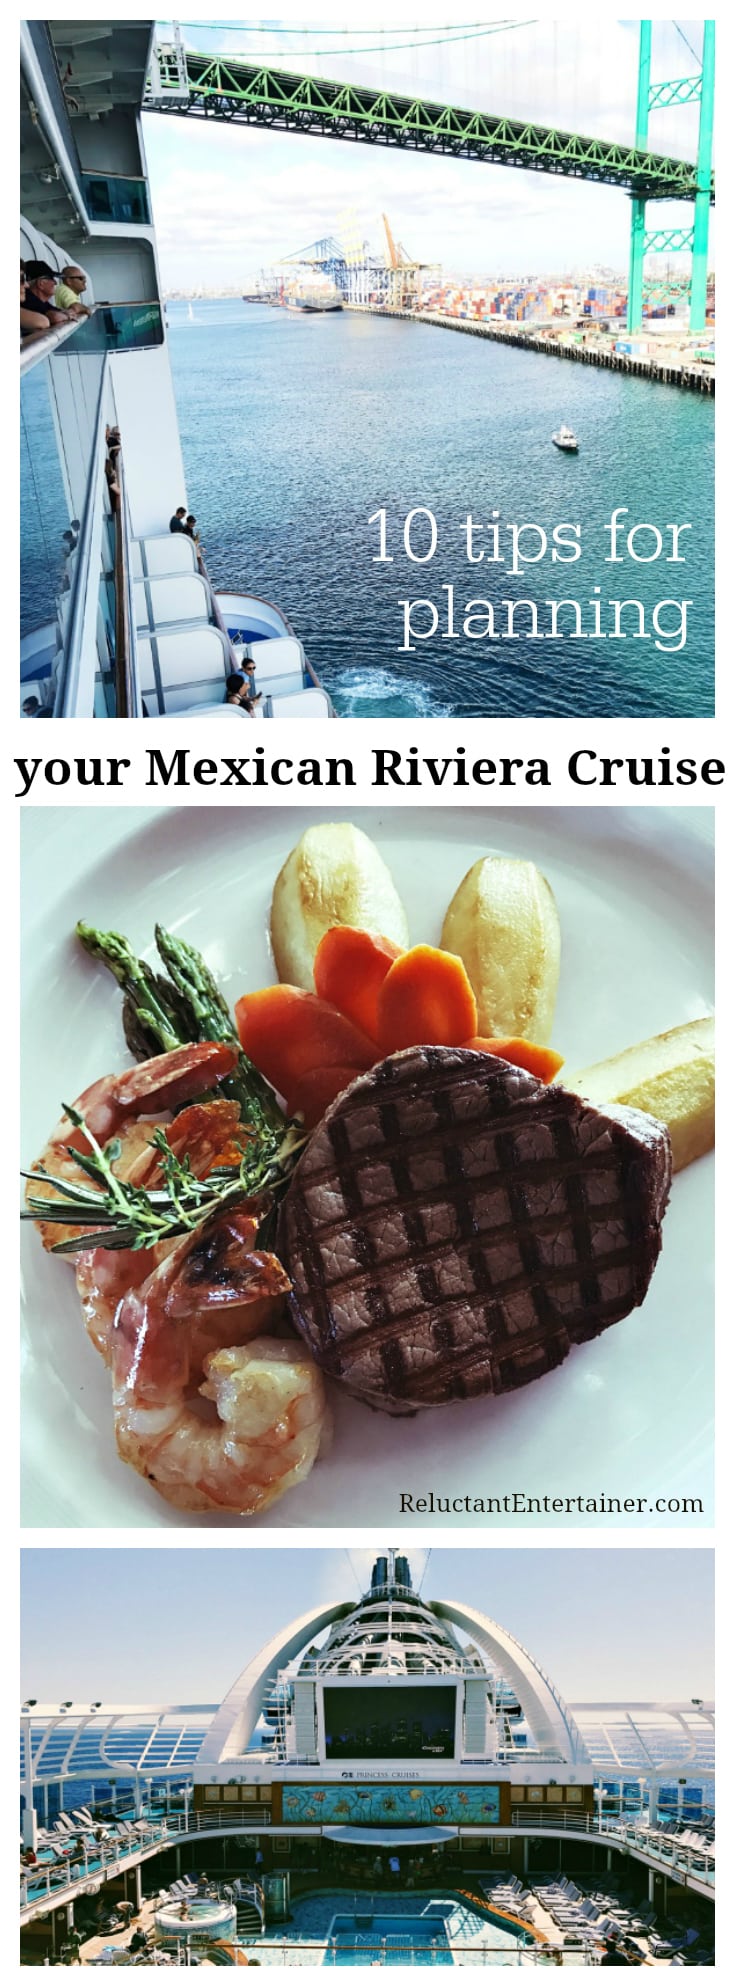 10 Tips for Planning your Mexican Riviera Cruise | ReluctantEntertainer.com